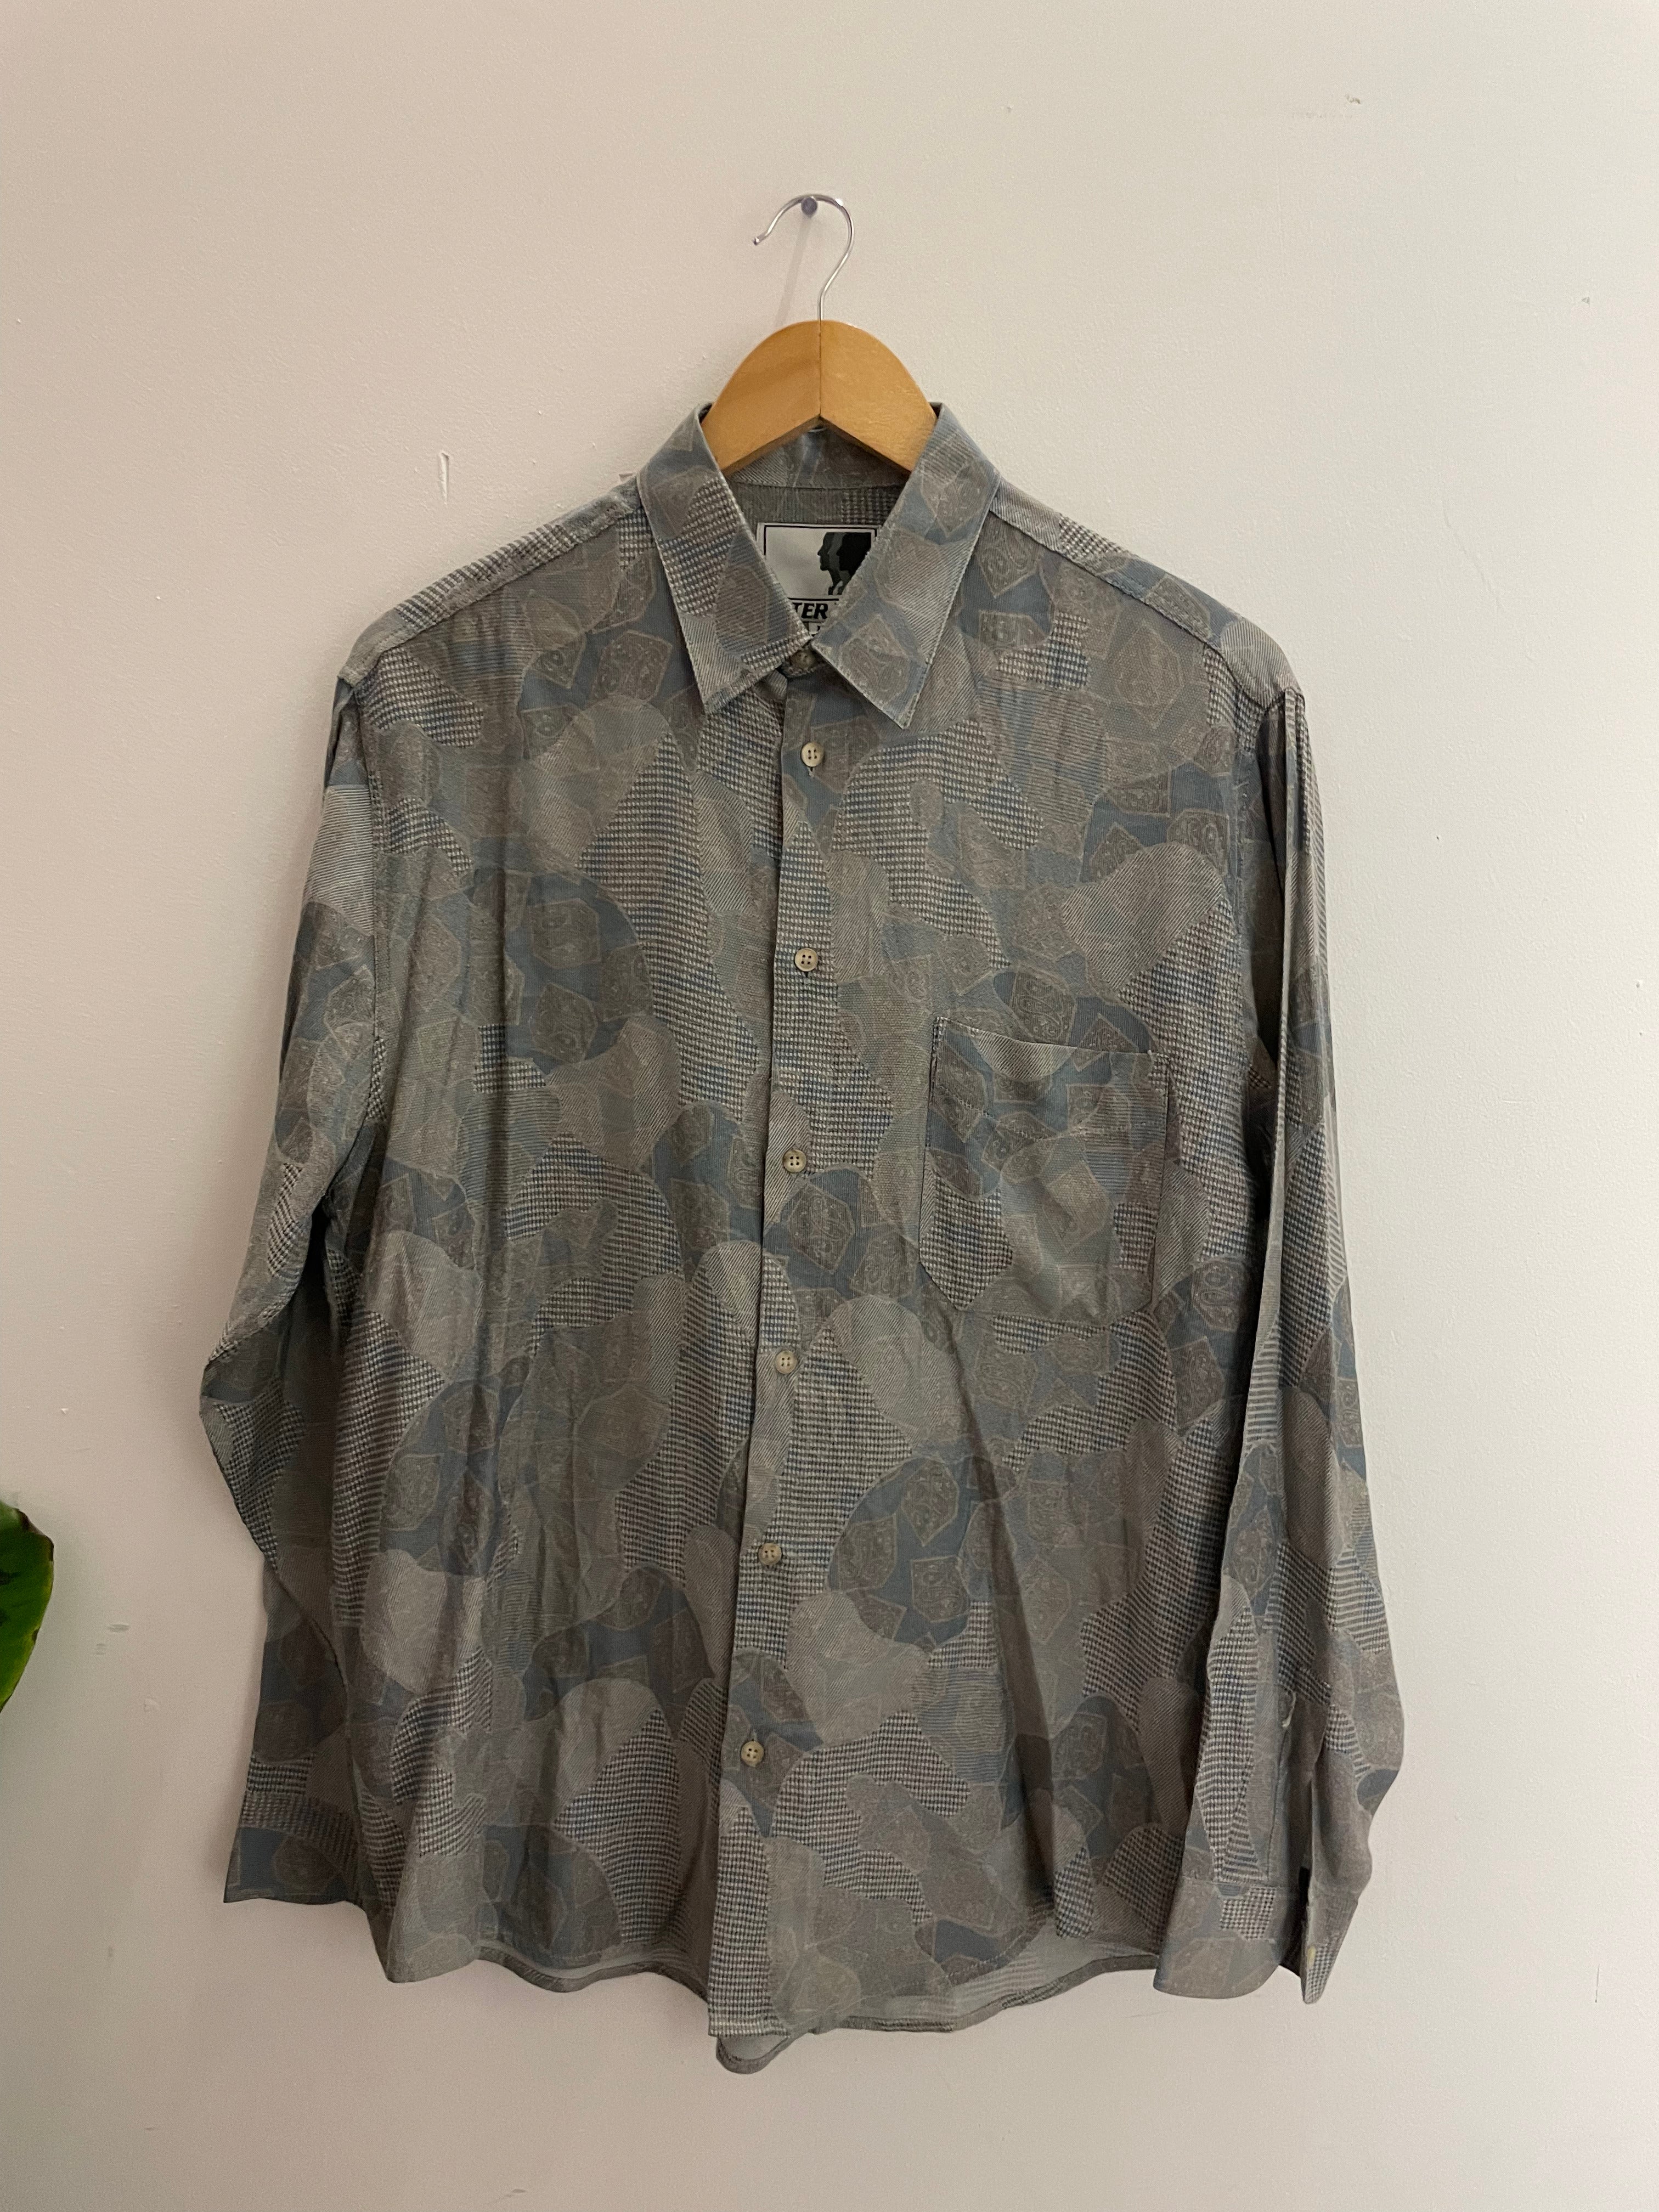 Vintage Alter ego grey abstract pattern shirt size M